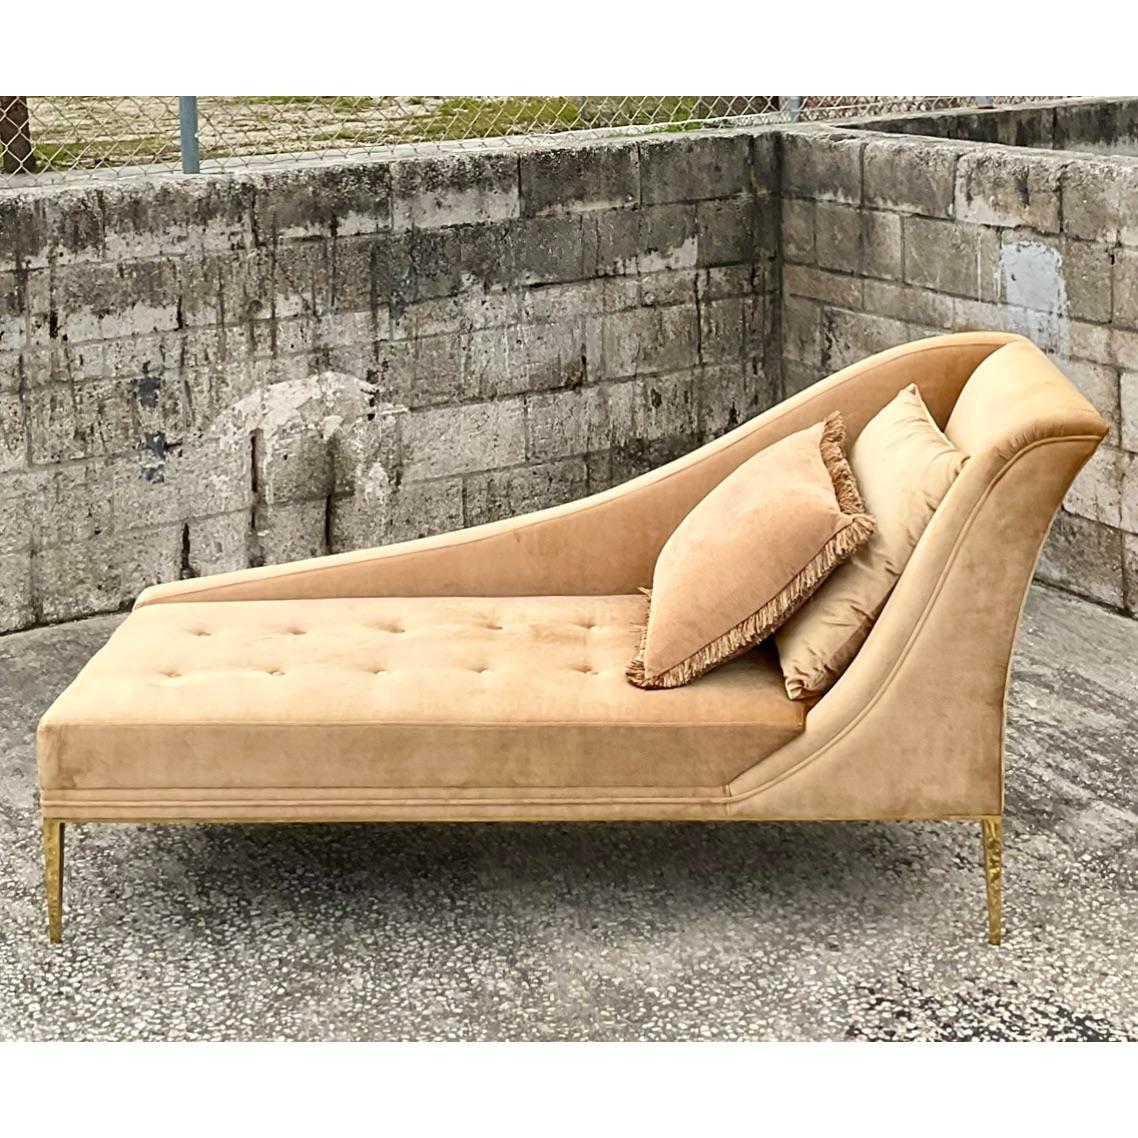 North American Contemporary Koket Envy Tufted Chaise Lounge